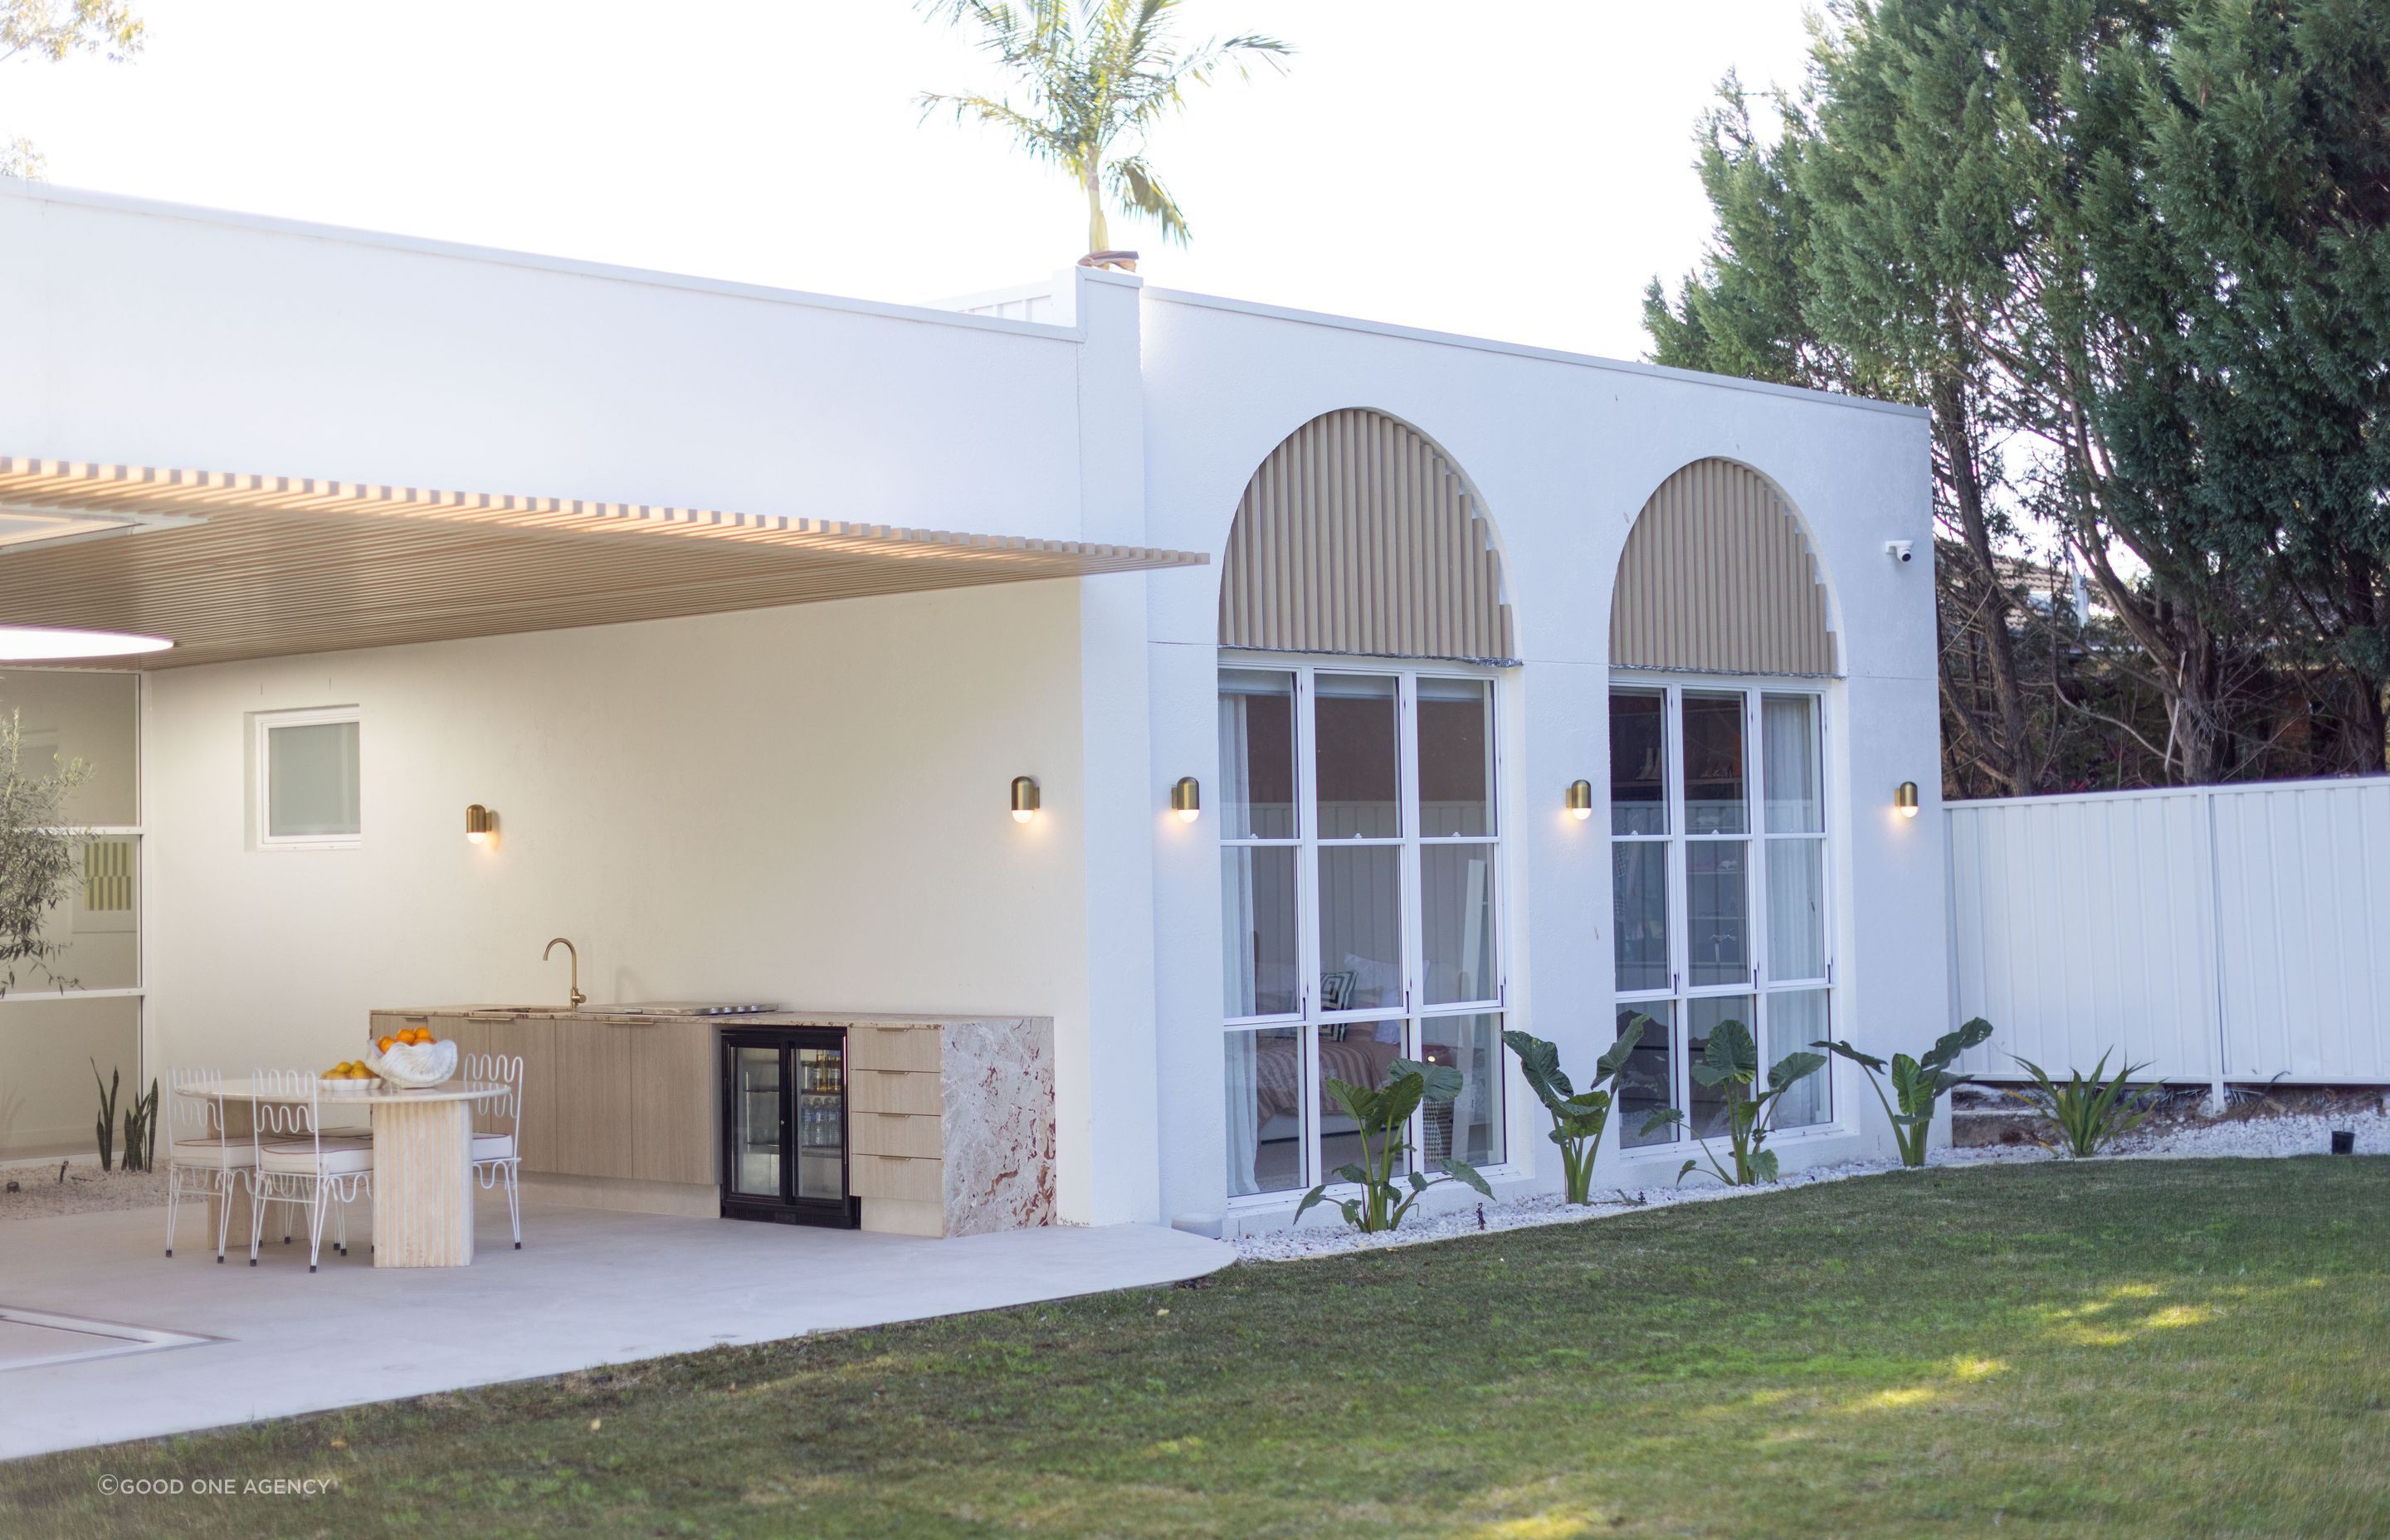 The exterior at the back of the home celebrates the arches found in Mediterranean architecture, while remaining contemporary in style.